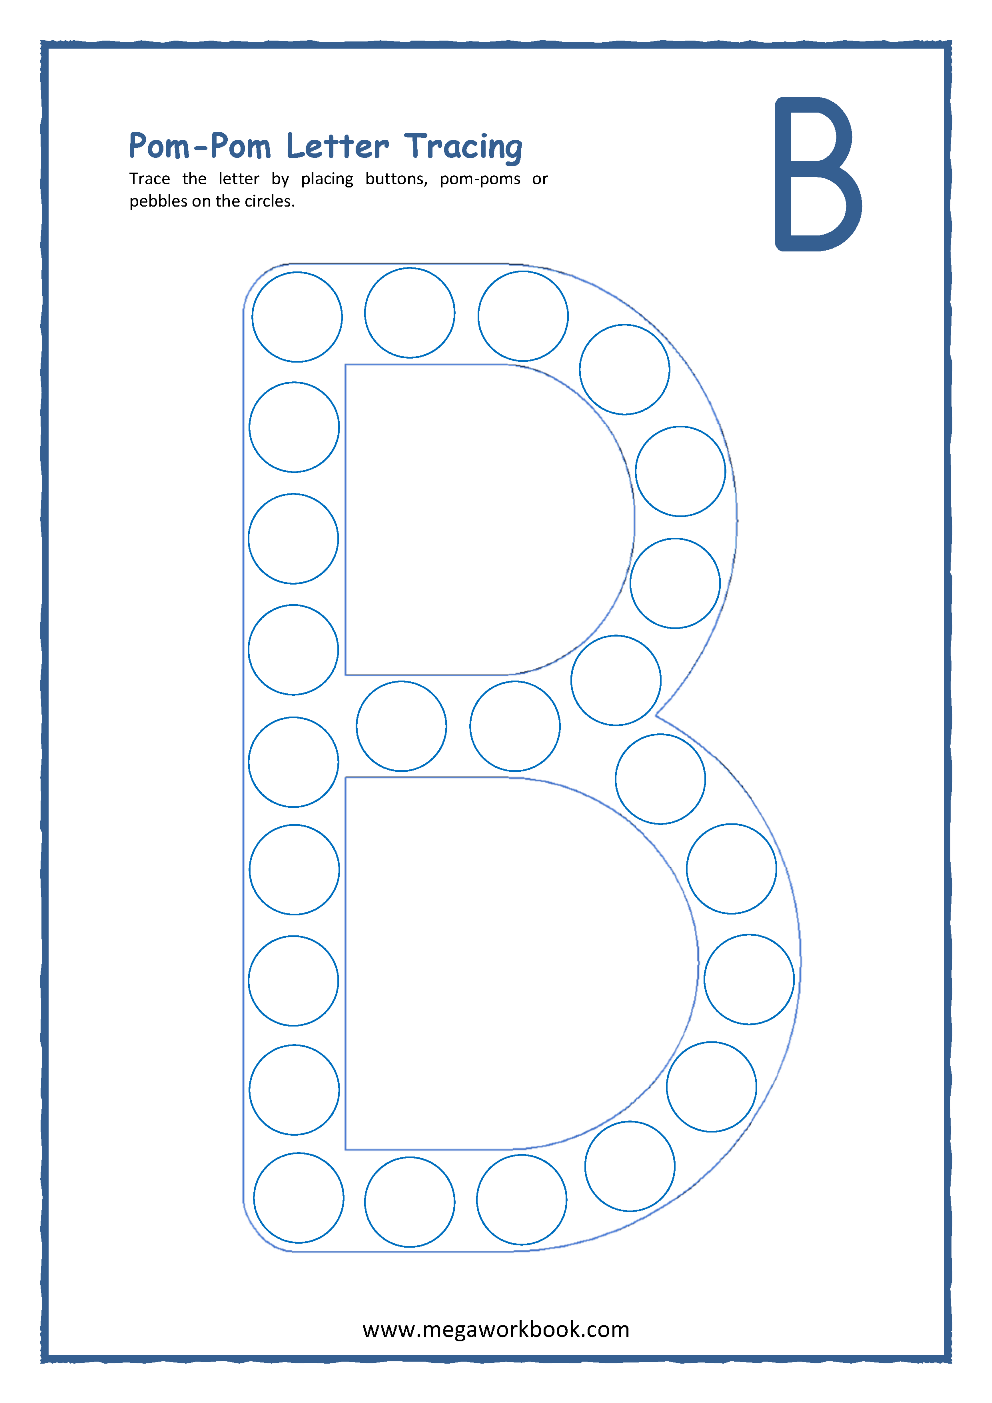 tracing-the-letter-b-printables-printable-word-searches